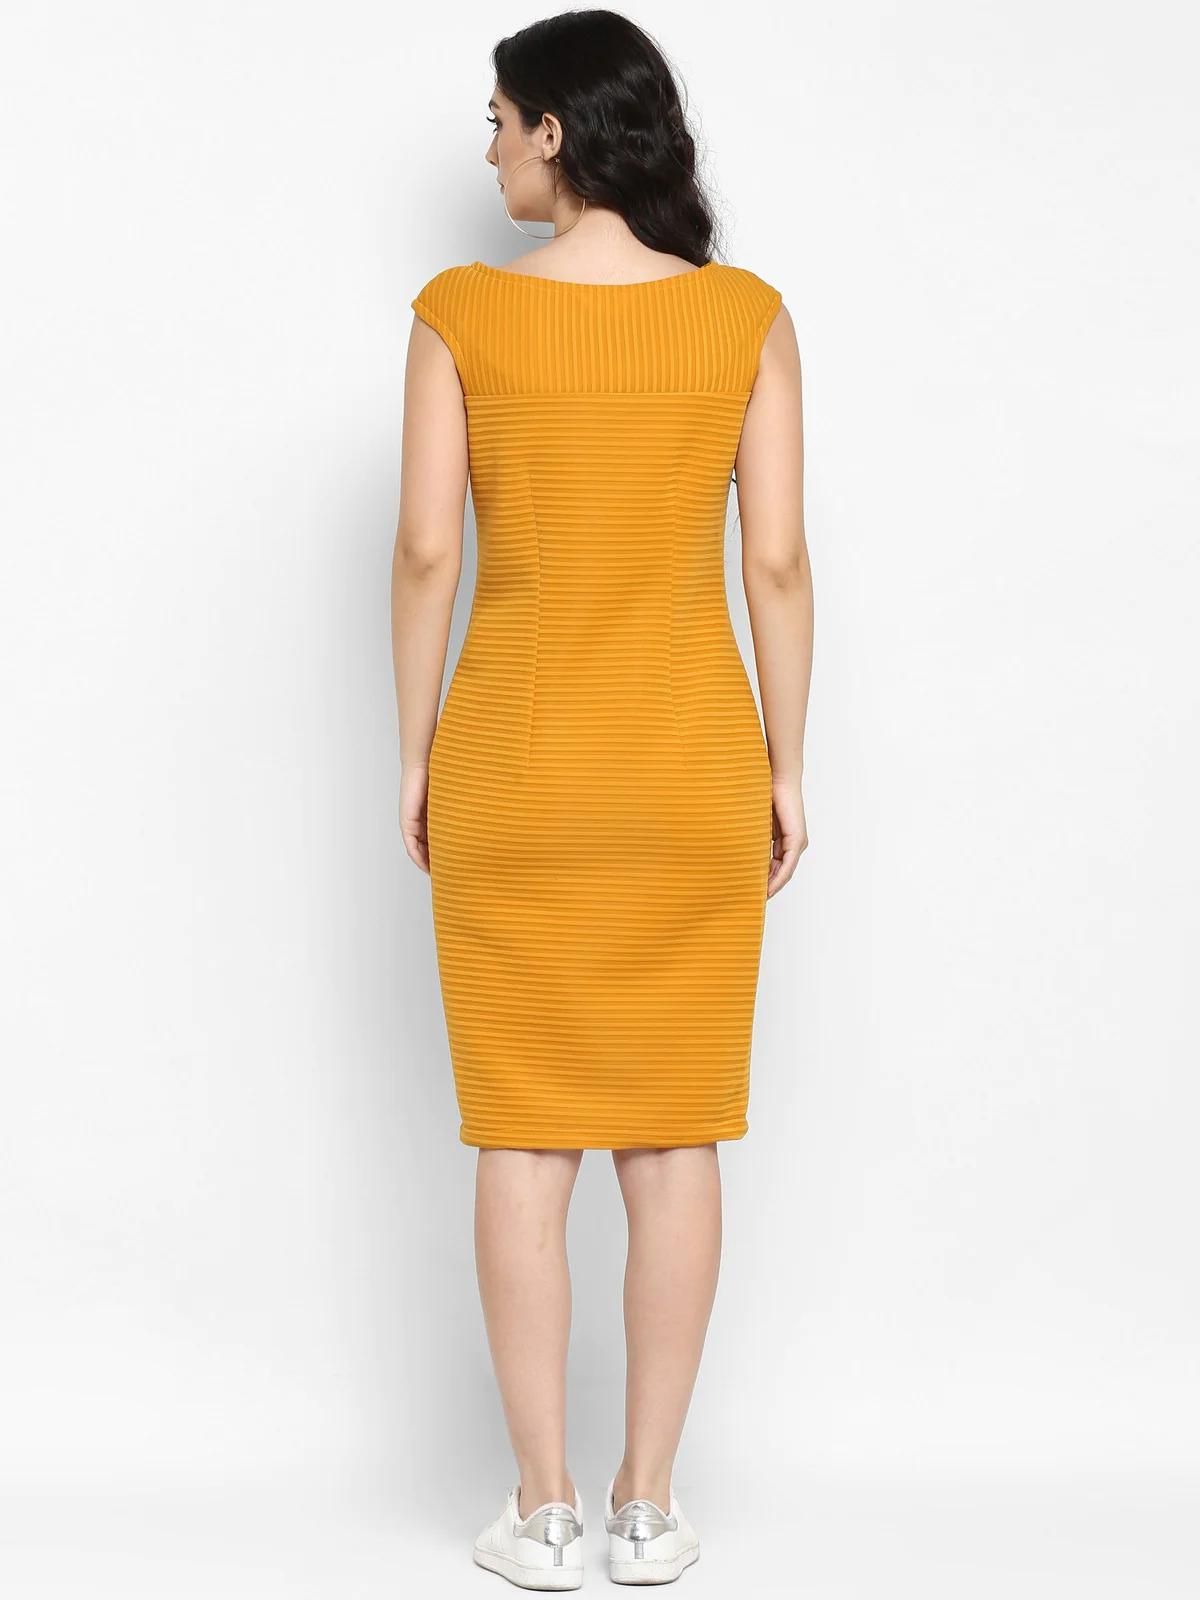 PANNKH Solid Mustard Self Striped Dress With Cap Sleeves